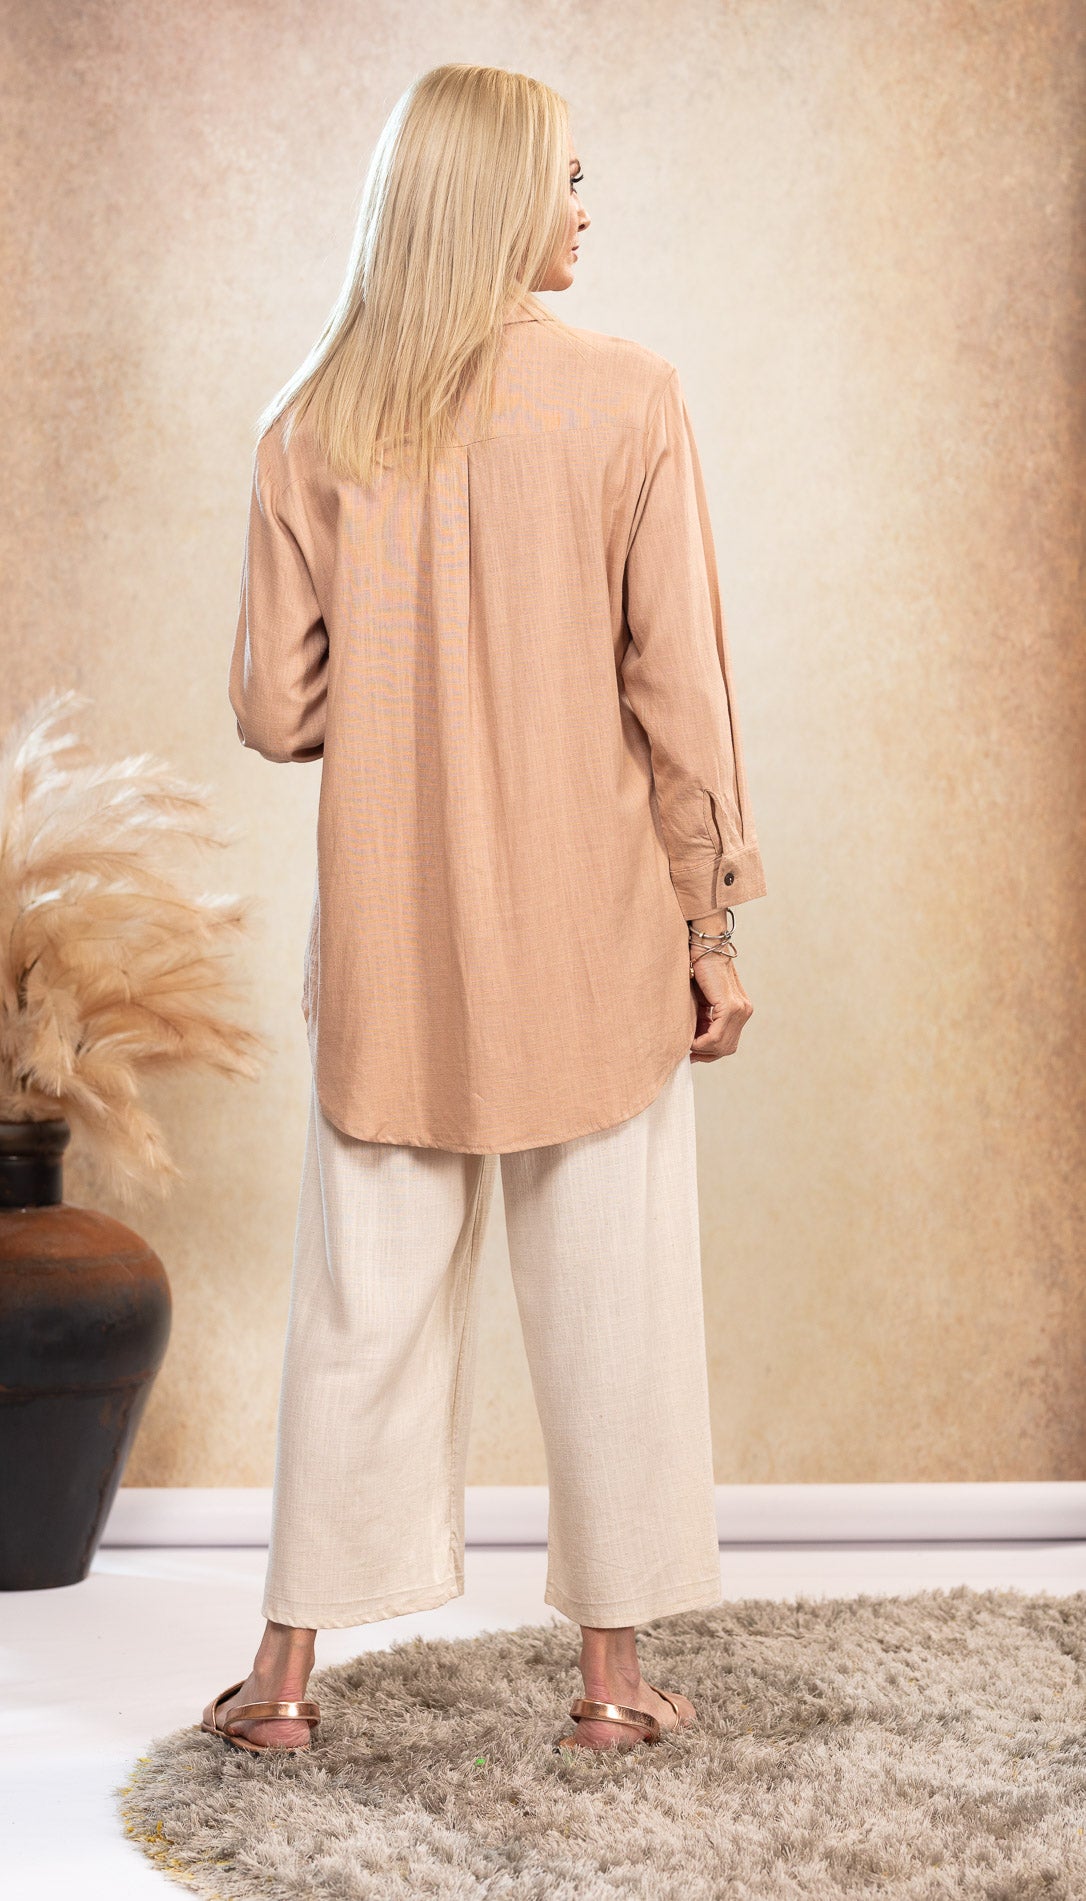 Classic Linen Shirt in Dusk freeshipping - White Amber the Label